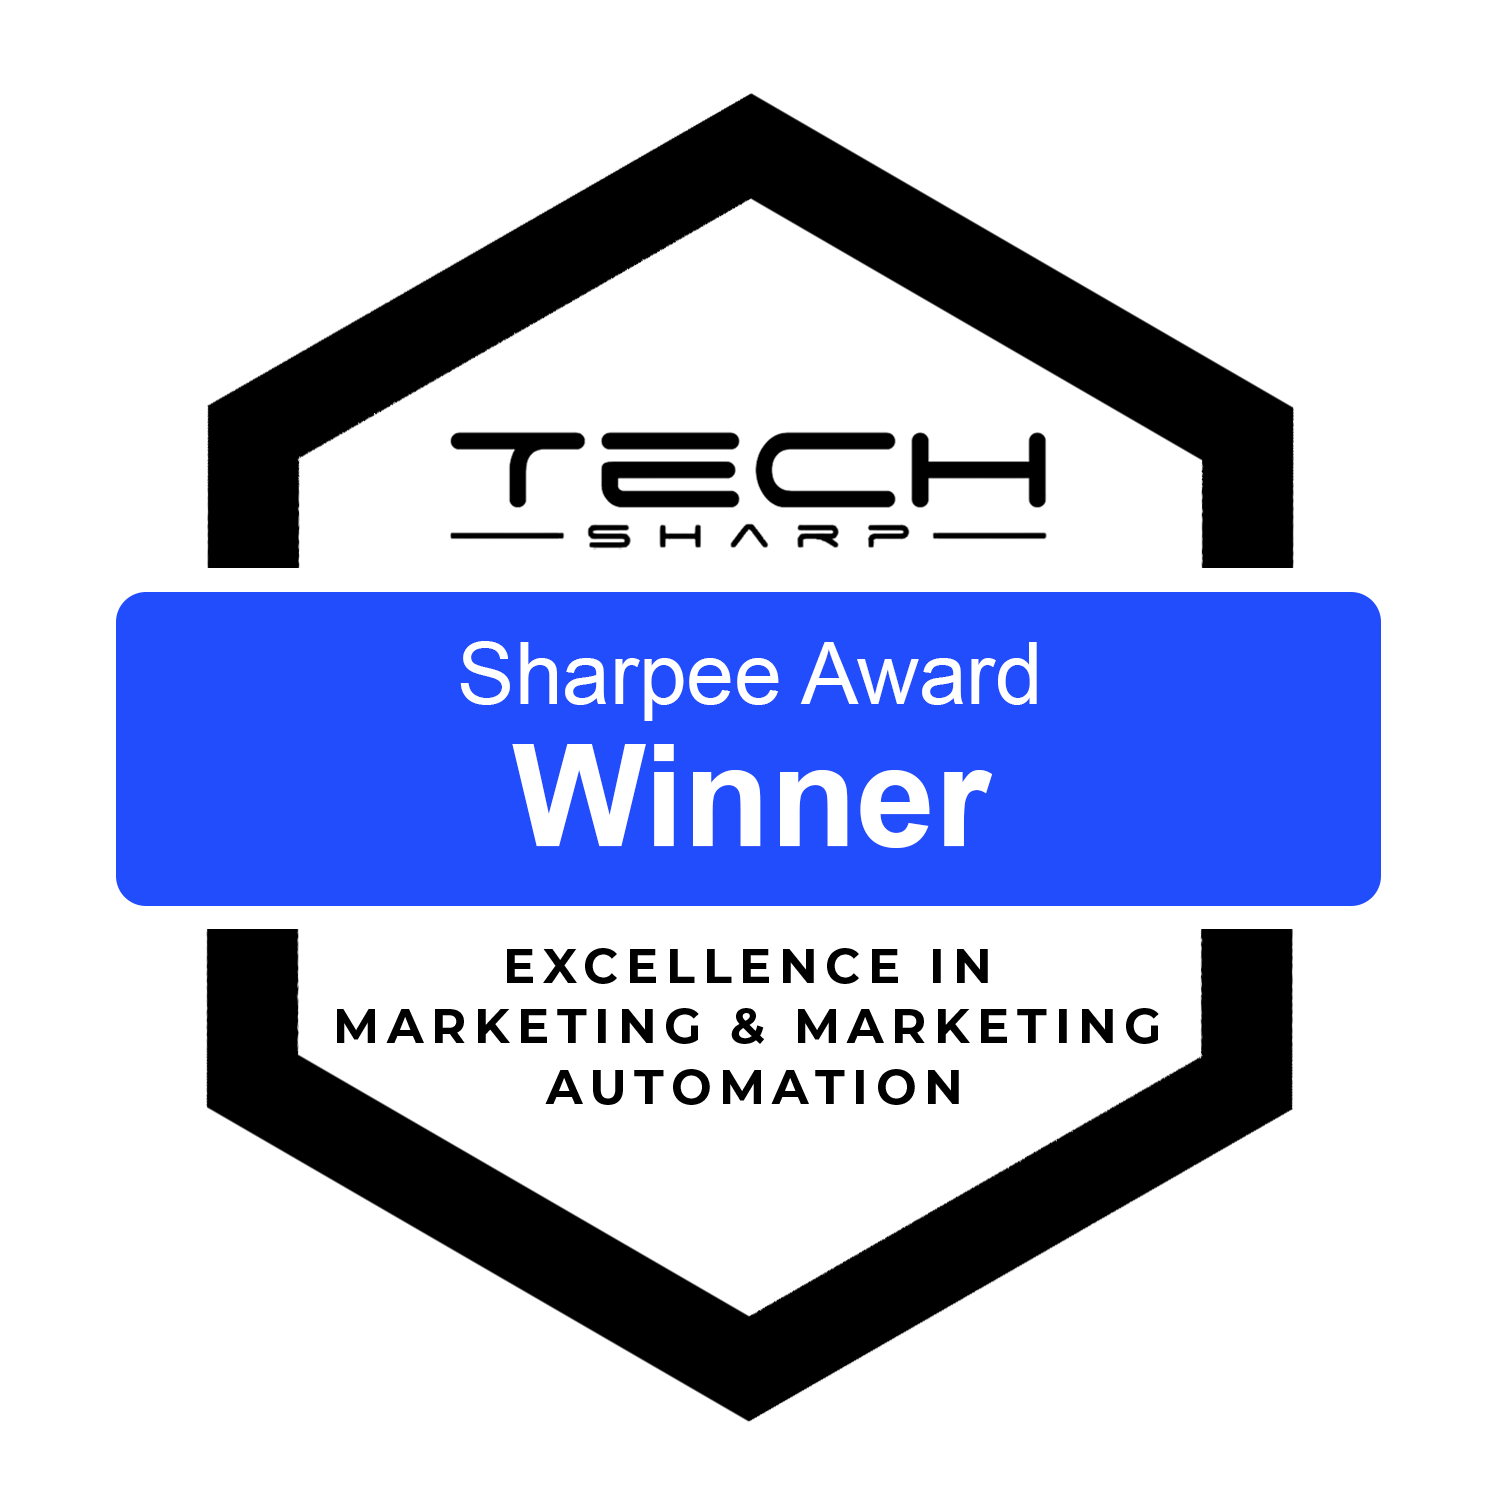 New York, United States : L’agence Cleverman Inc. remporte le prix Sharpee Award for Excellence in Business Process Automation & Marketing